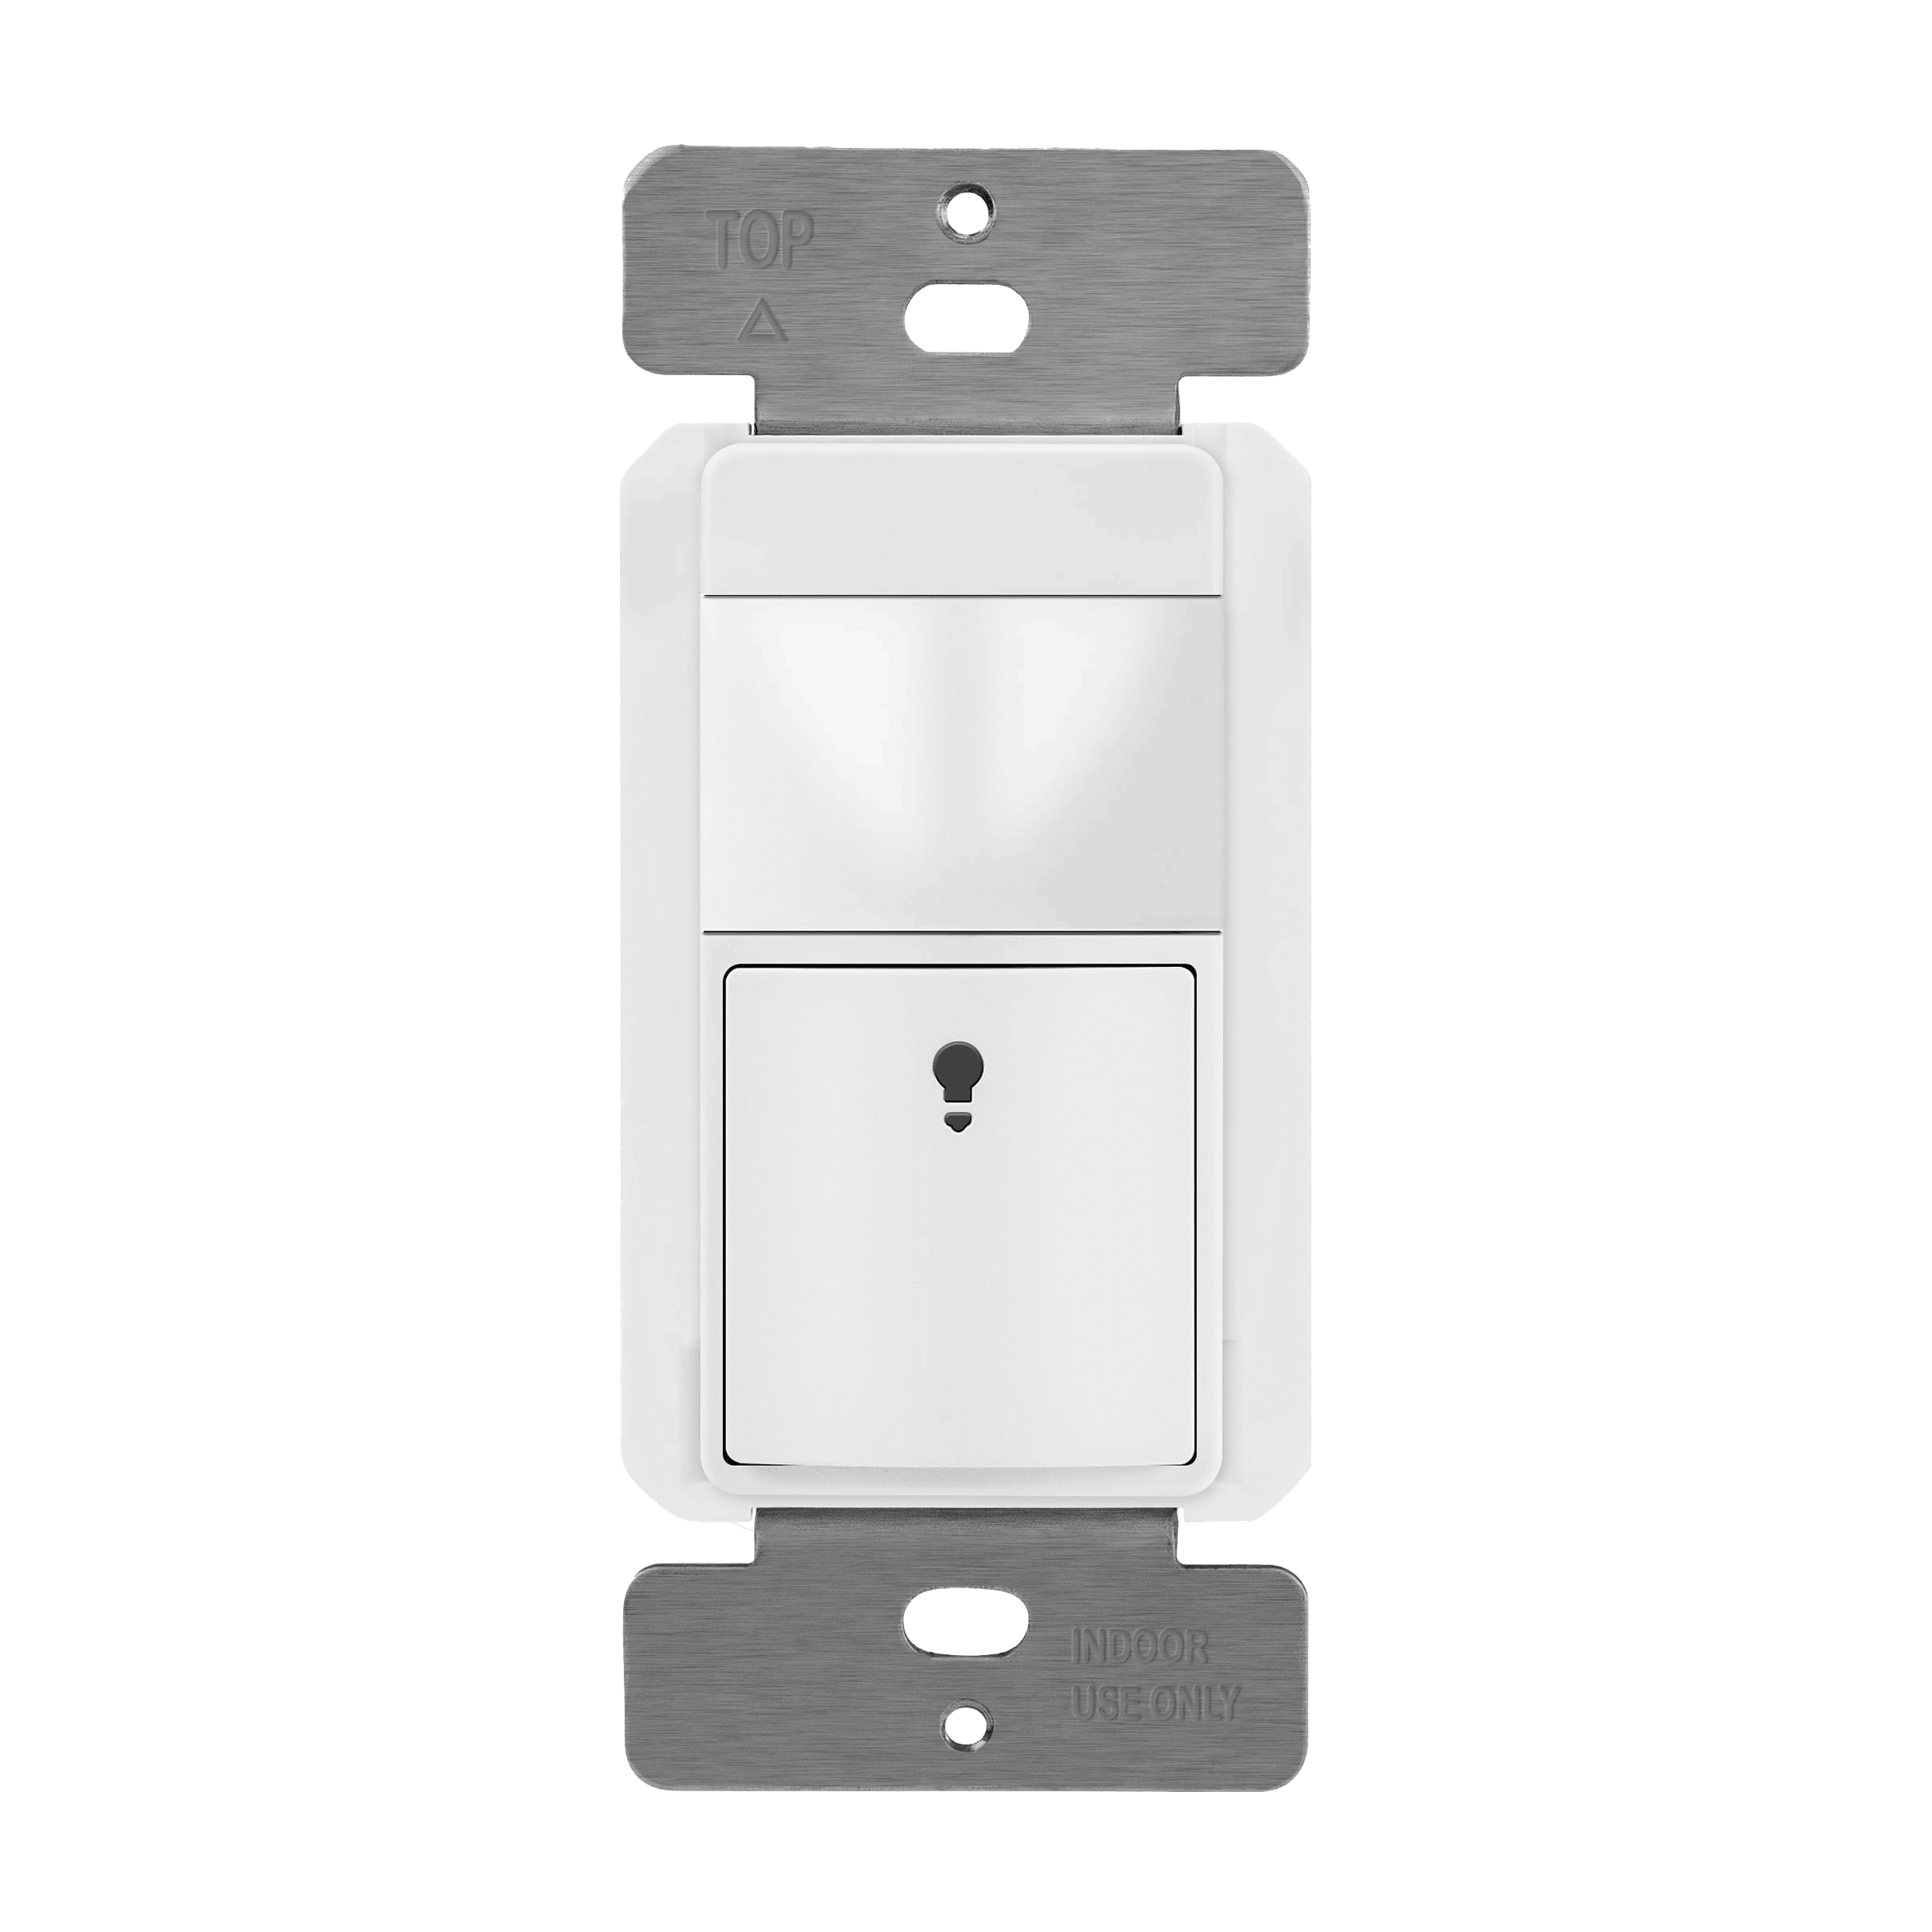 Motion Sensor Light Switch with Dimming | TOPGREENER